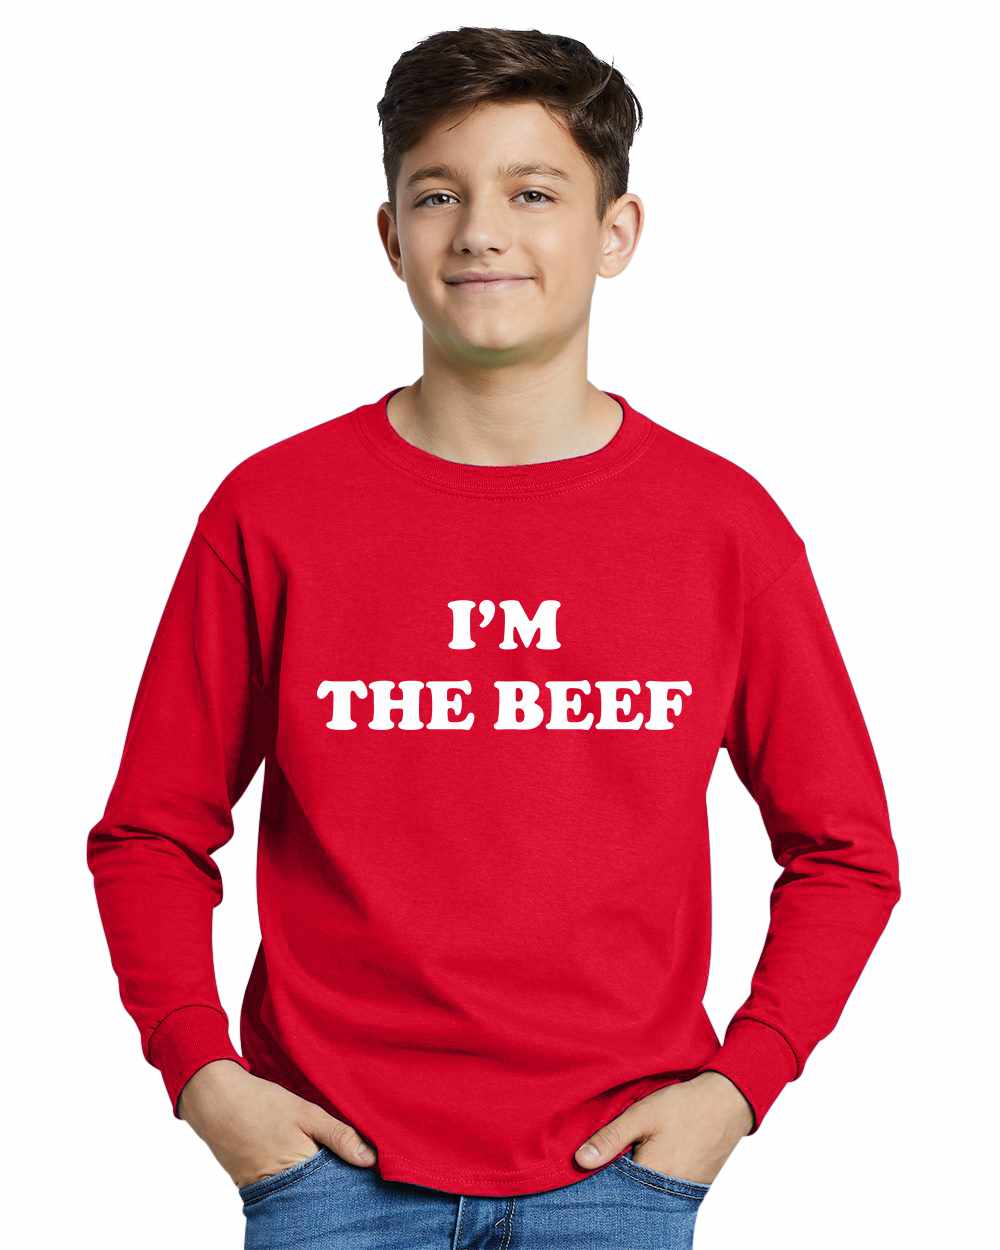 I'm The Beef on Youth Long Sleeve Shirt